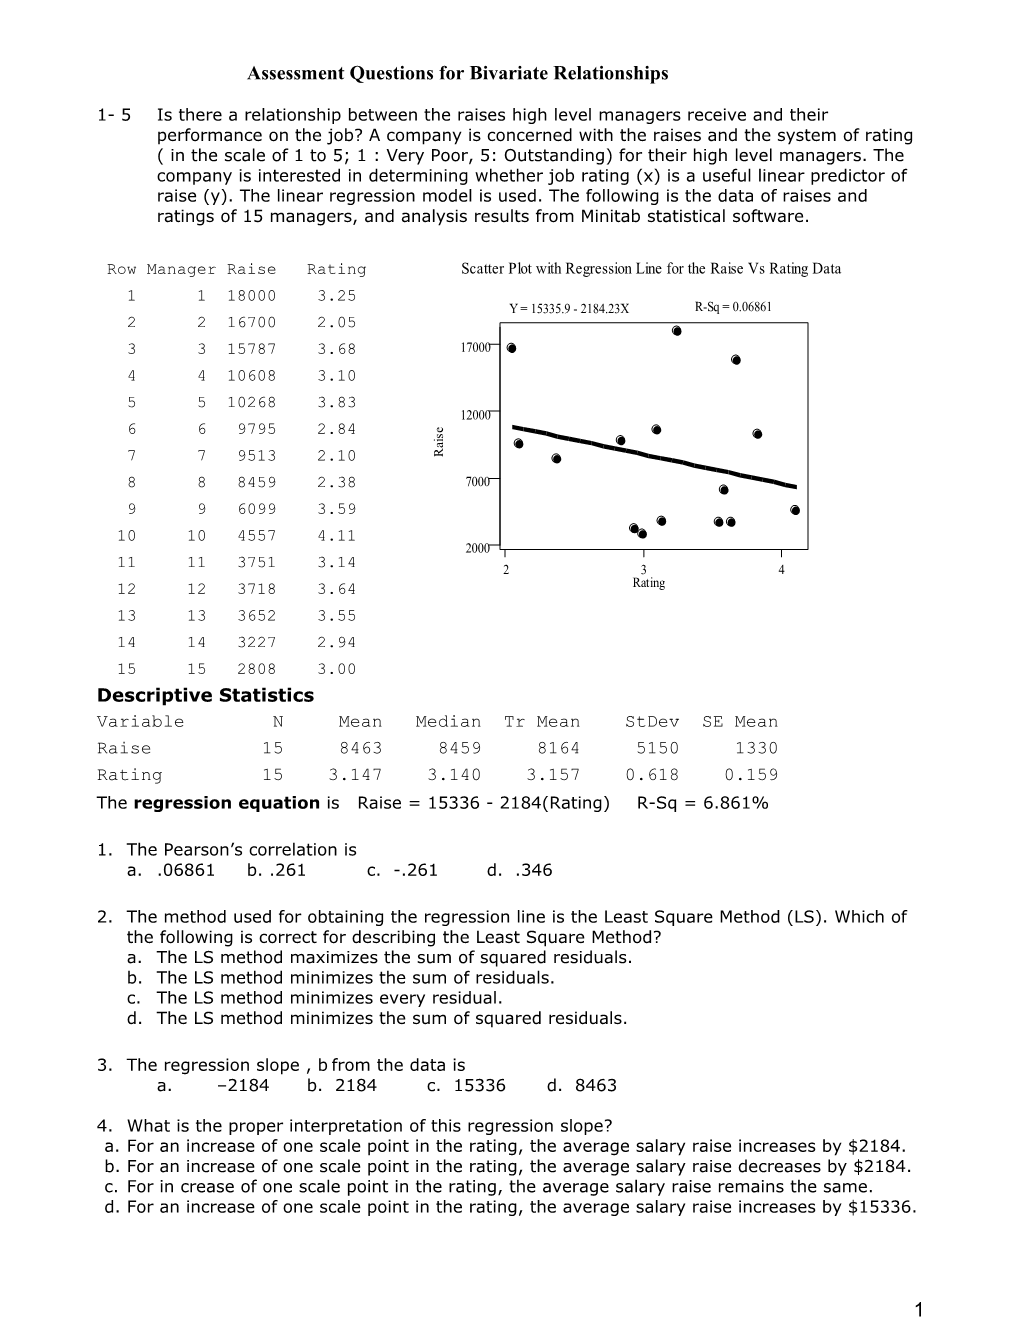 Assessment Questions for Bivariate Relationships